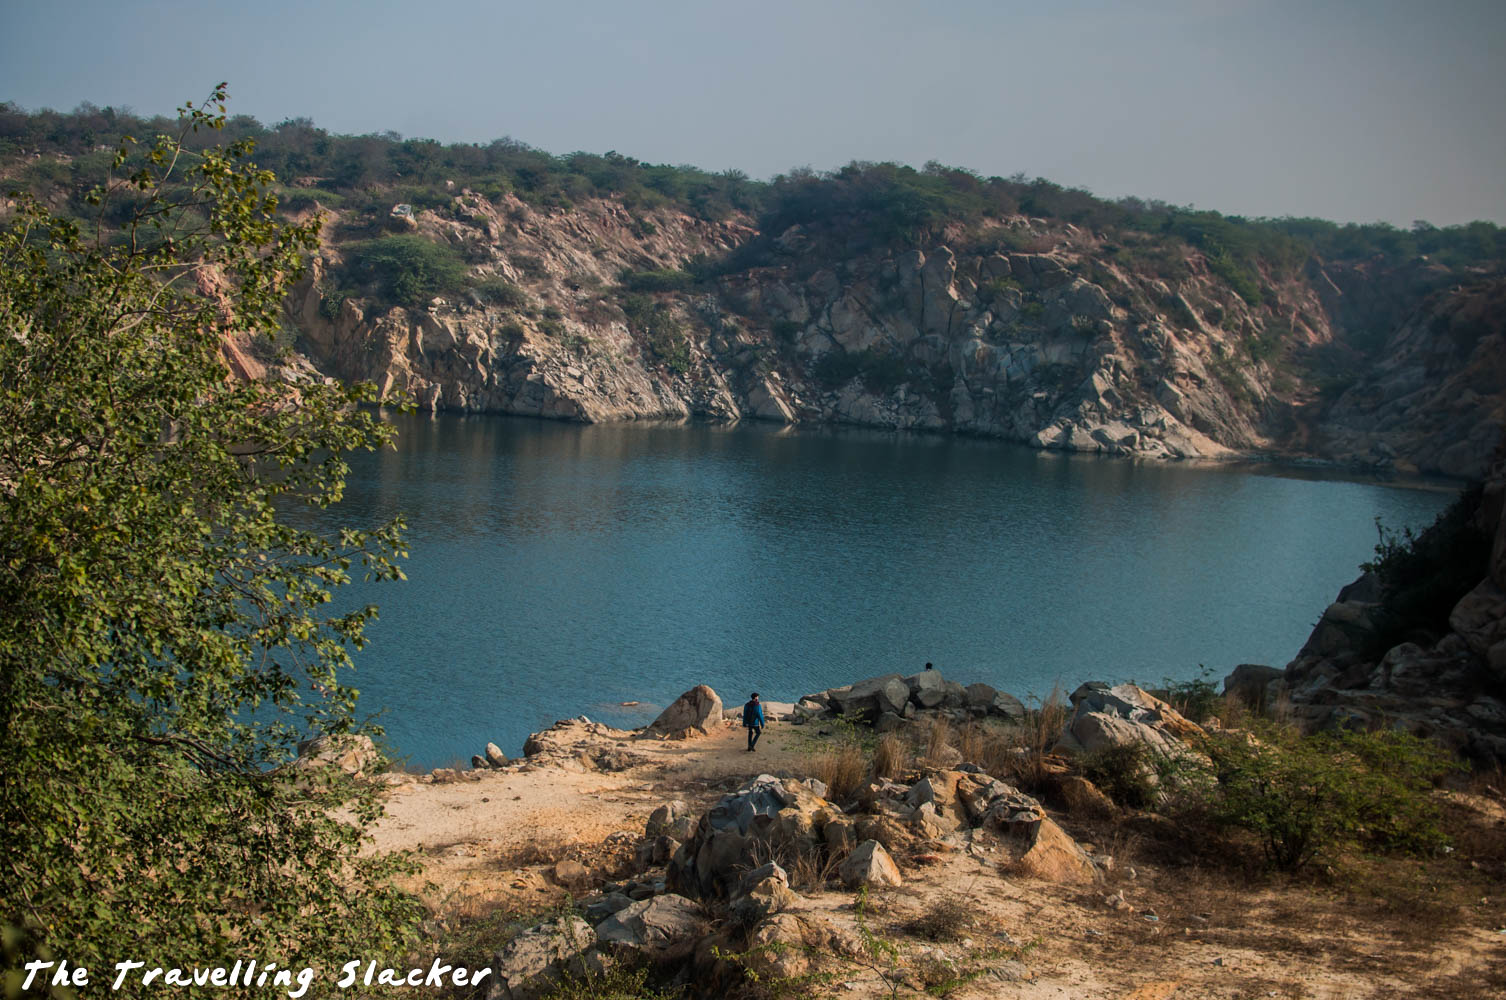 Asola Bhatti Lakes: Nameless Delights of the Lawless Backyard